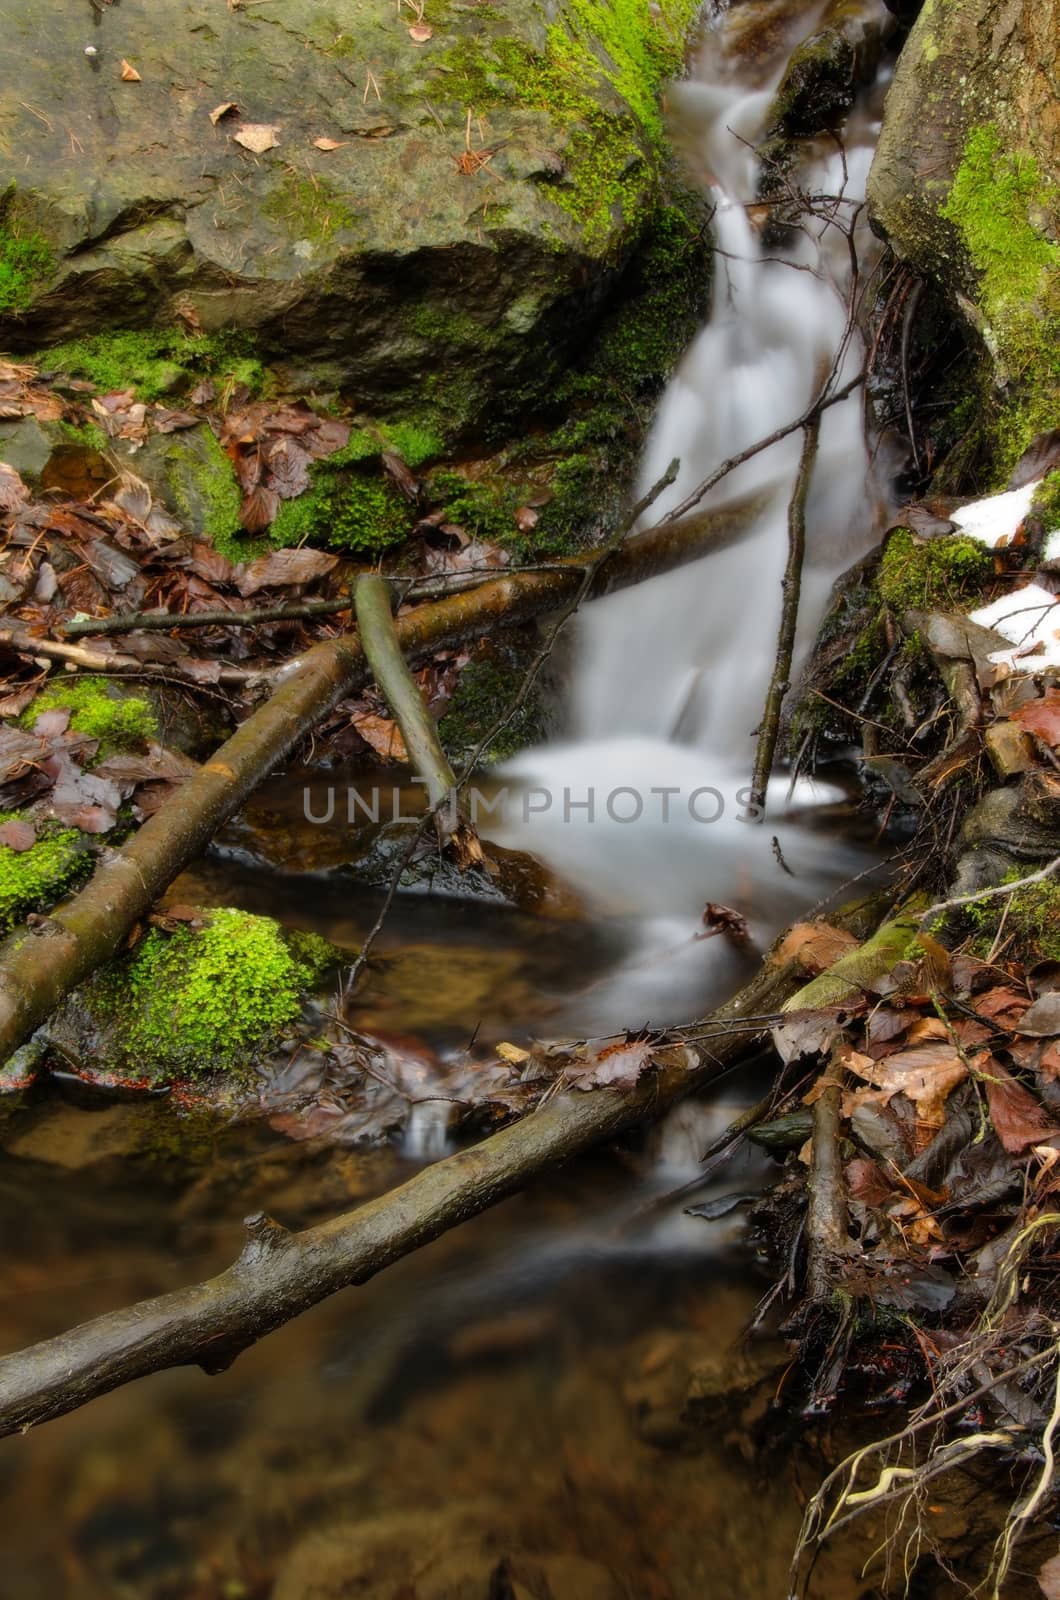 Amazing stream detail with branches and mossy rock.